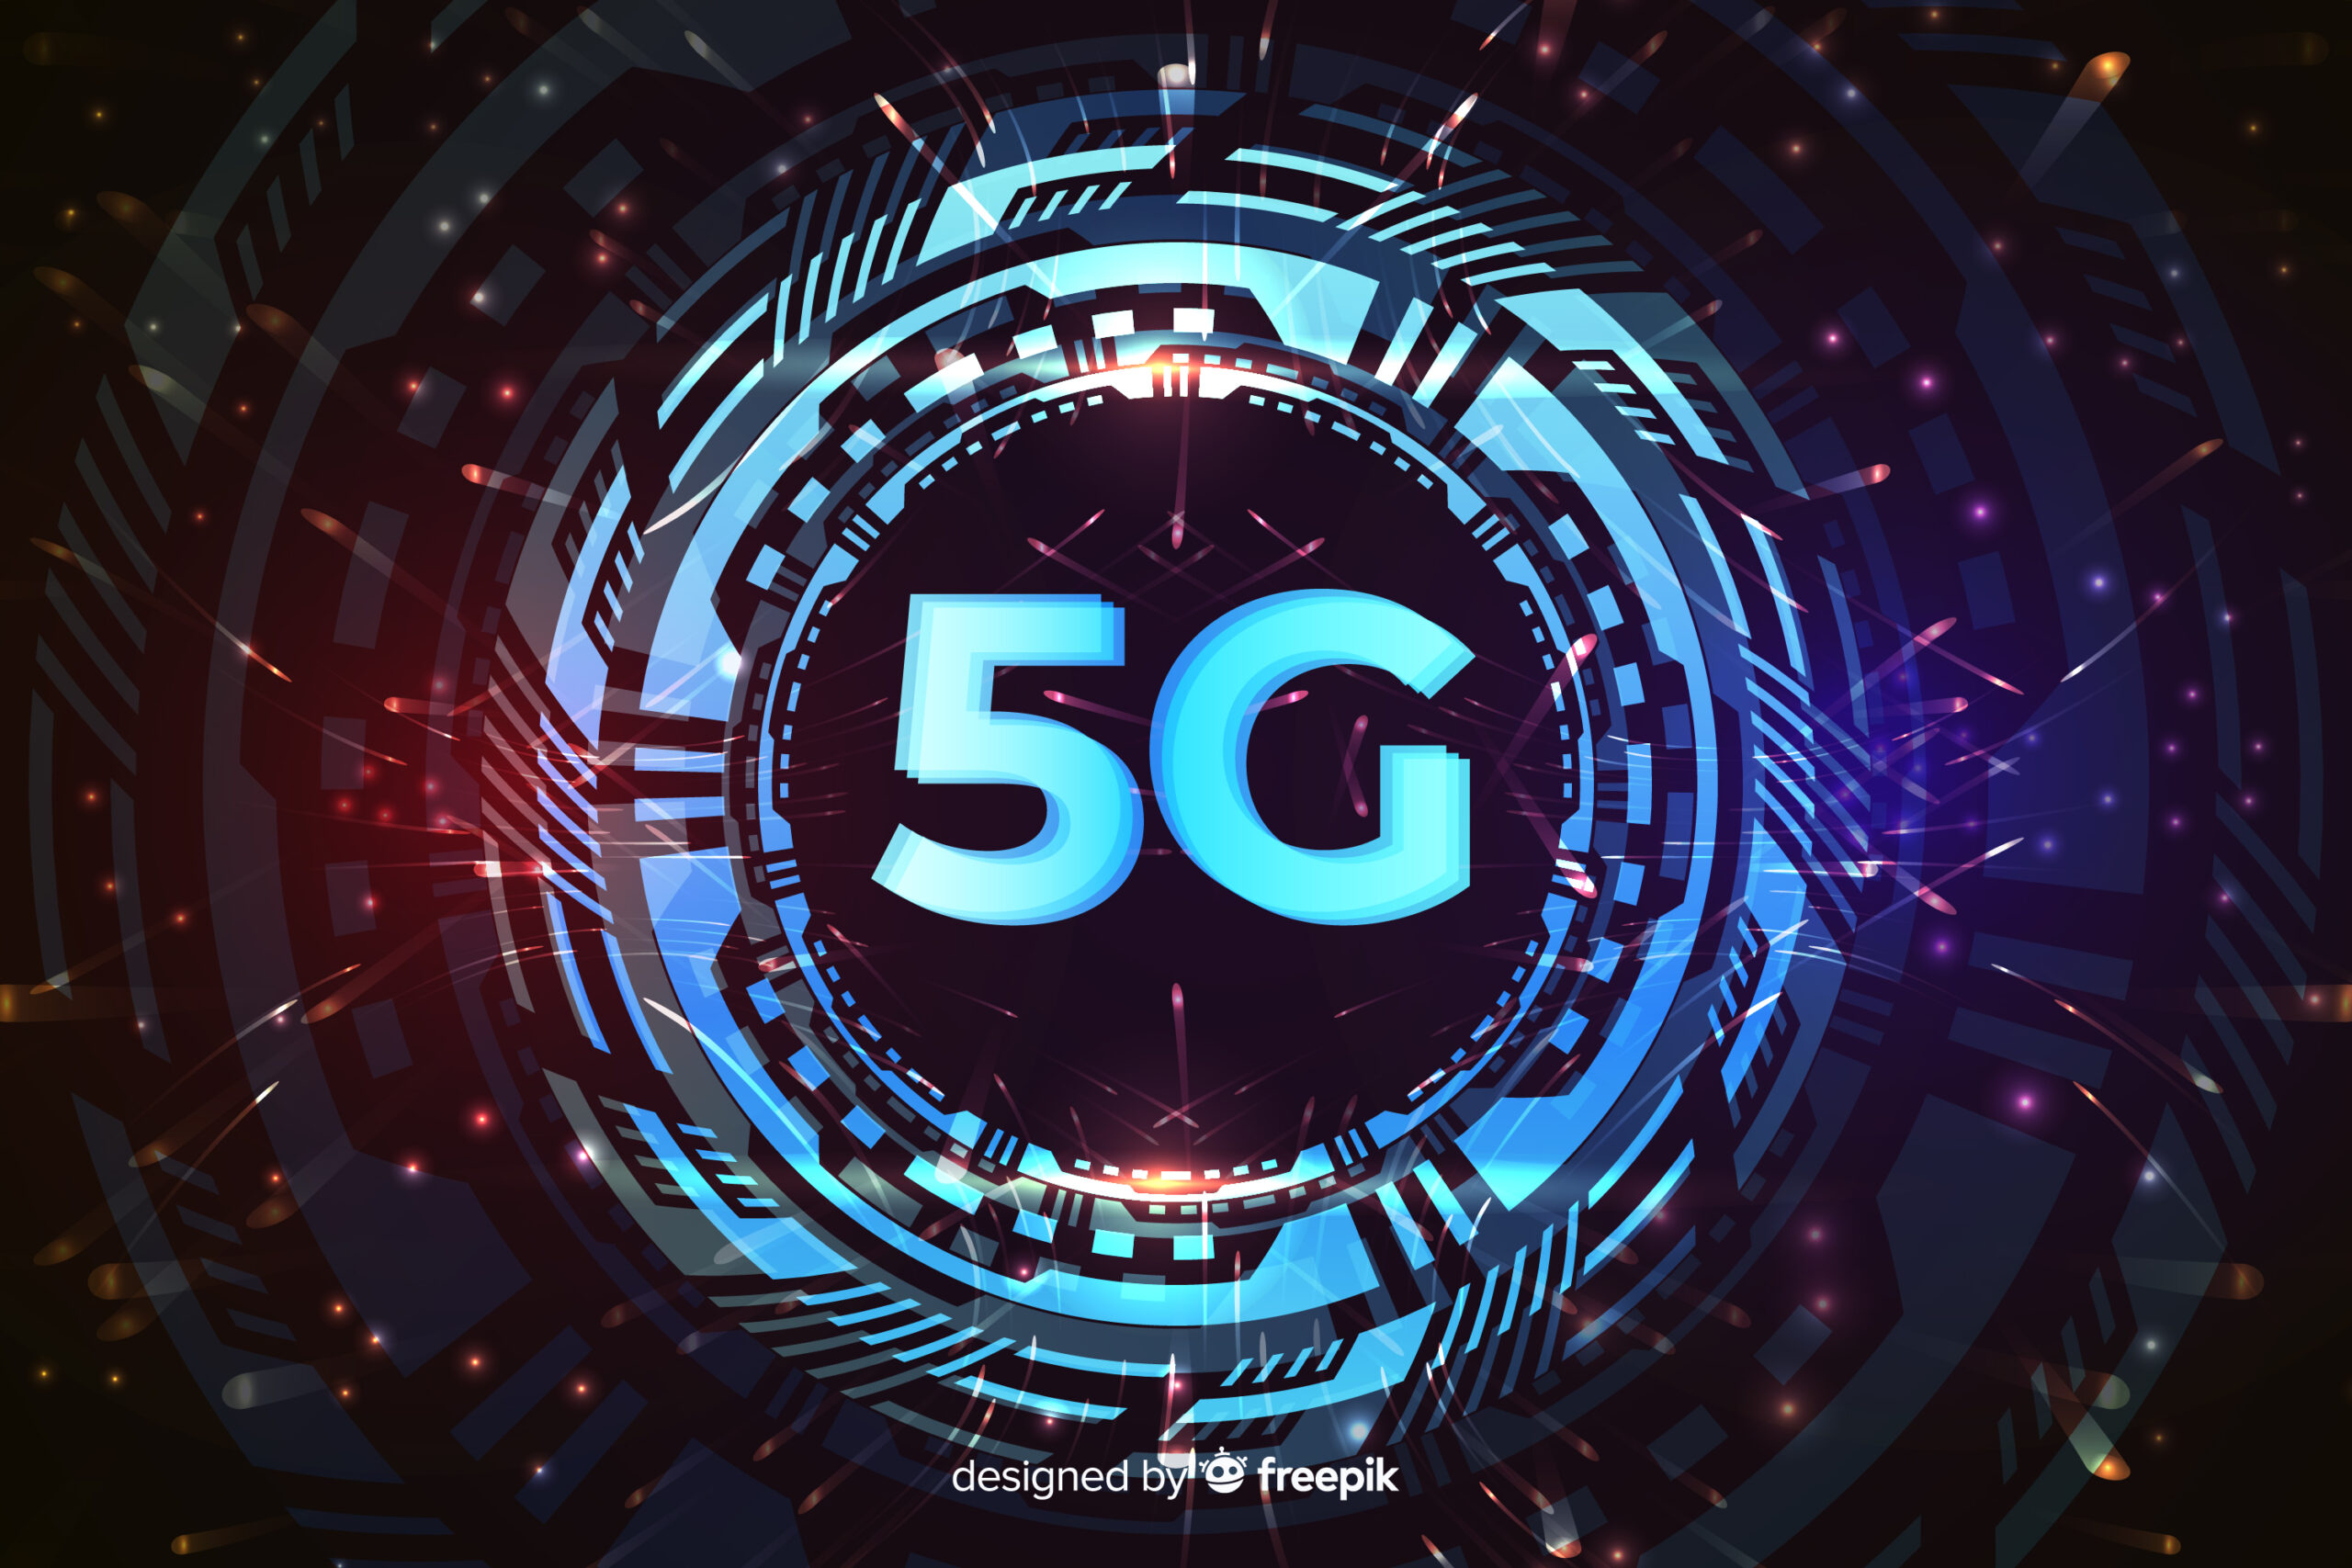 Nokia and Telecom Egypt bring 5G to Egypt for the first time. Companies sign deal to upgrade Telecom Egypt’s radio access network and introduce 5G-ready services in the cities of Alexandria, Aswan, Cairo, Giza, and Luxor